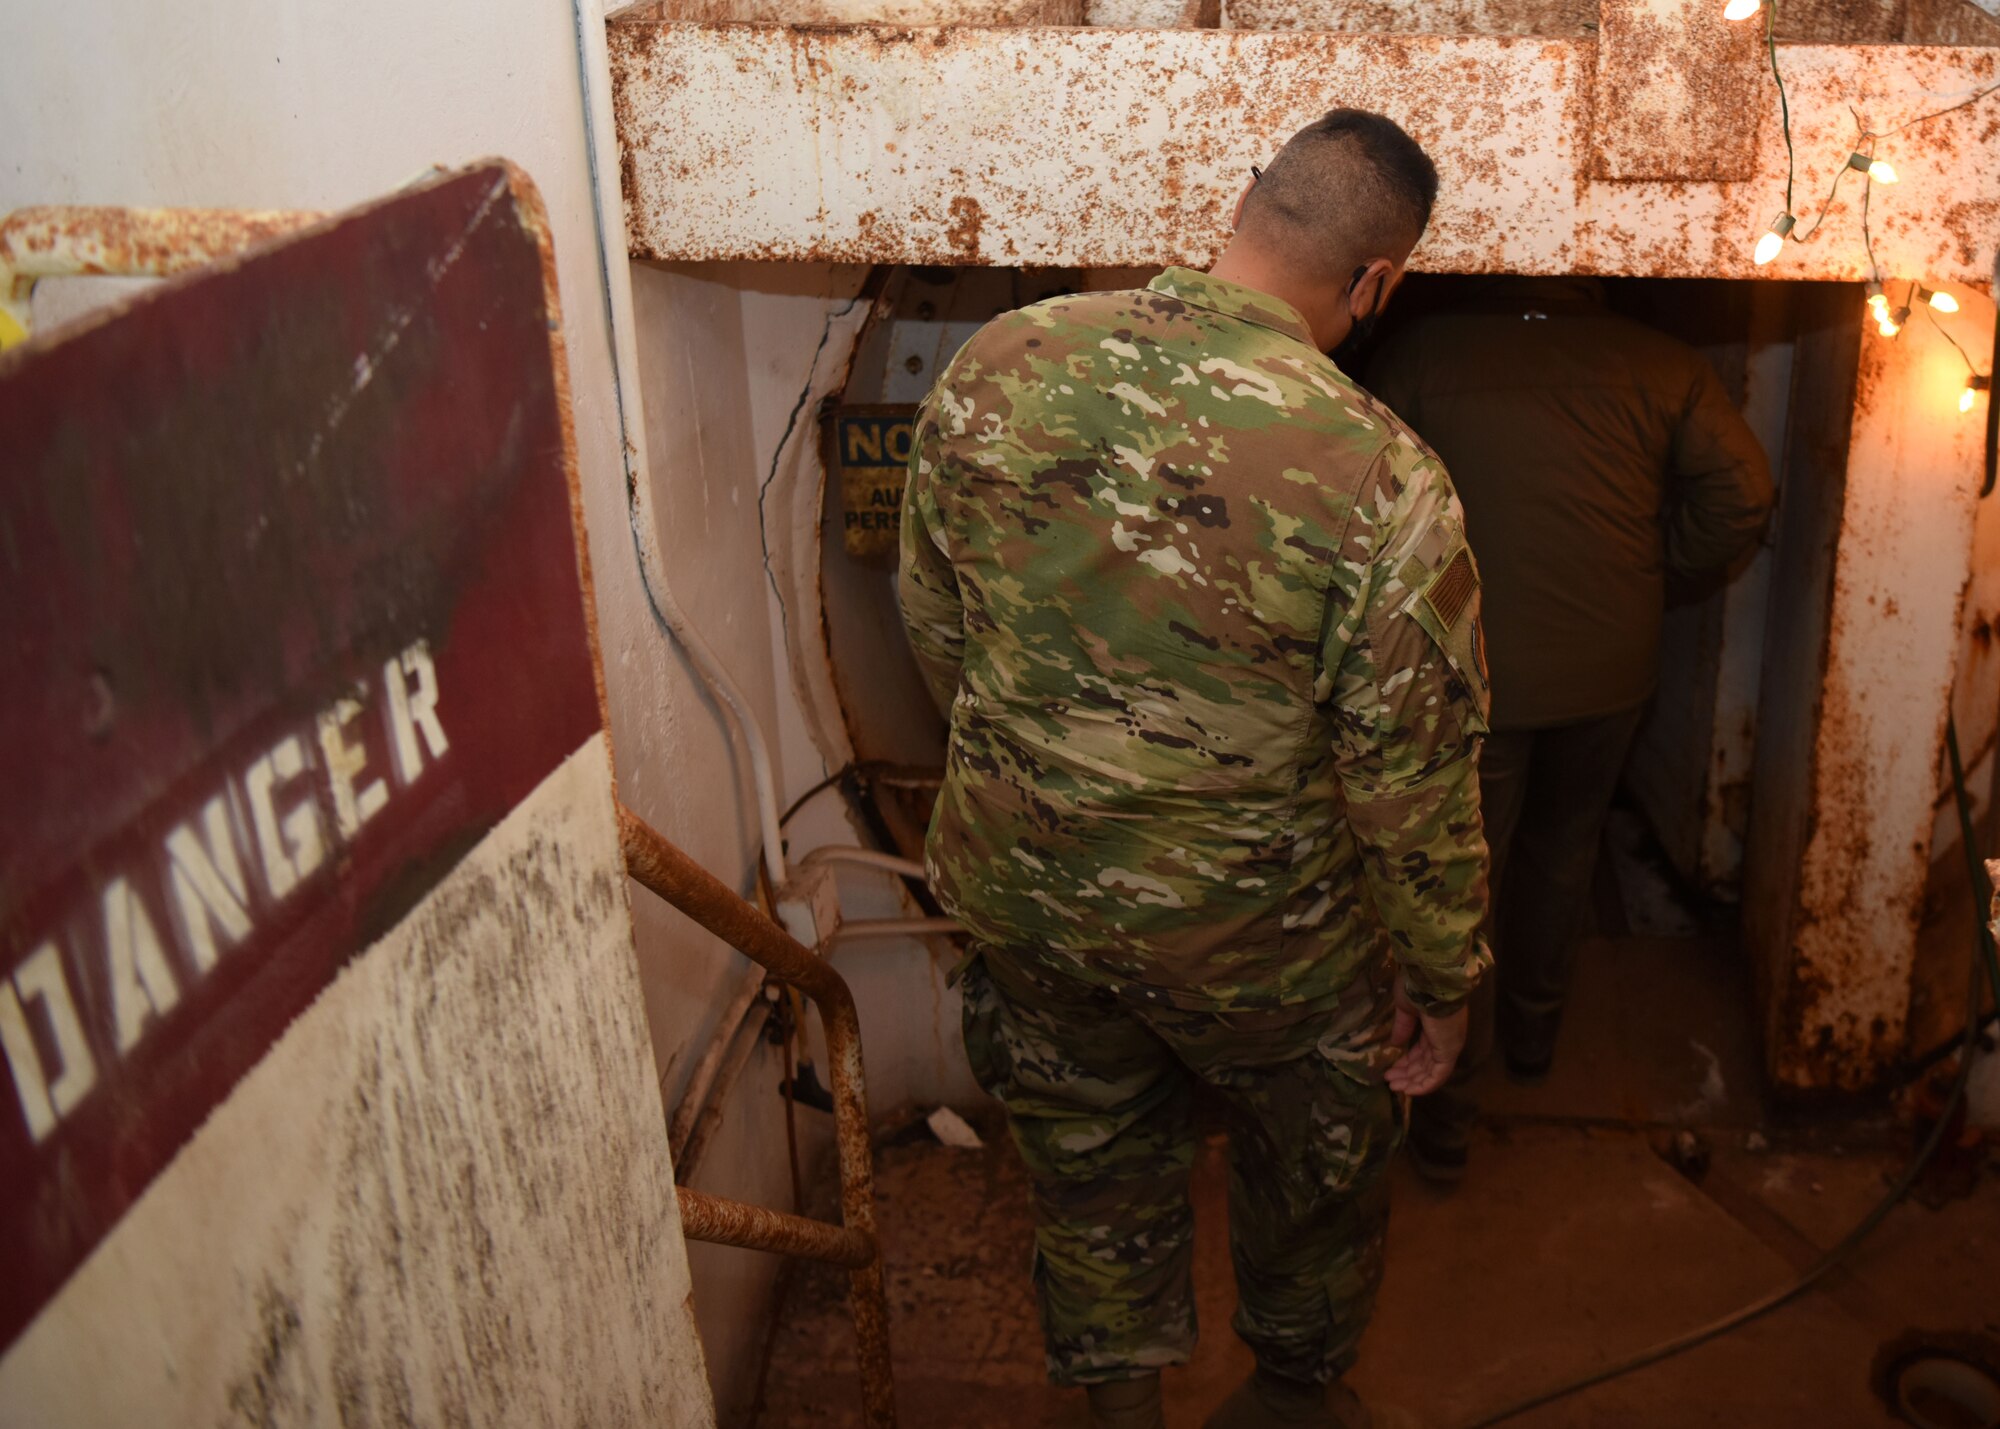 A member of Goodfellow enters the access tunnel to the Atlas missile silo at the Lawn Atlas Missile Base in Lawn, Texas, Oct. 26, 2020. Members were given a guided tour of the Cold War-era site. (U.S. Air Force photo by Airman 1st Class Ethan Sherwood)